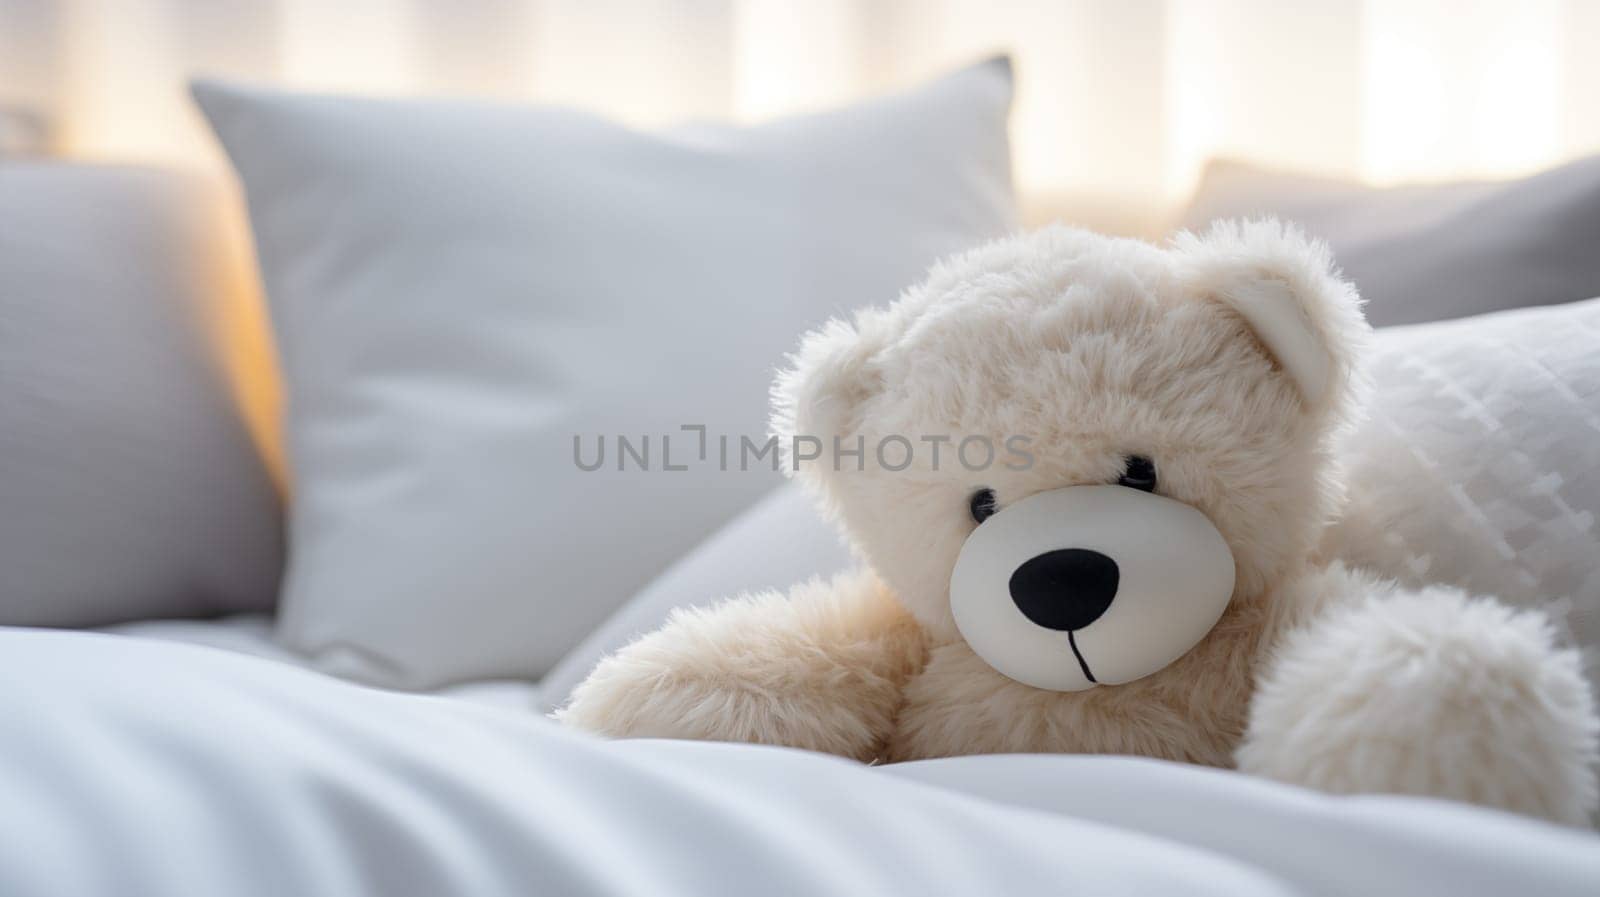 Cute white teddy bear, lie in white bed, at daylight.